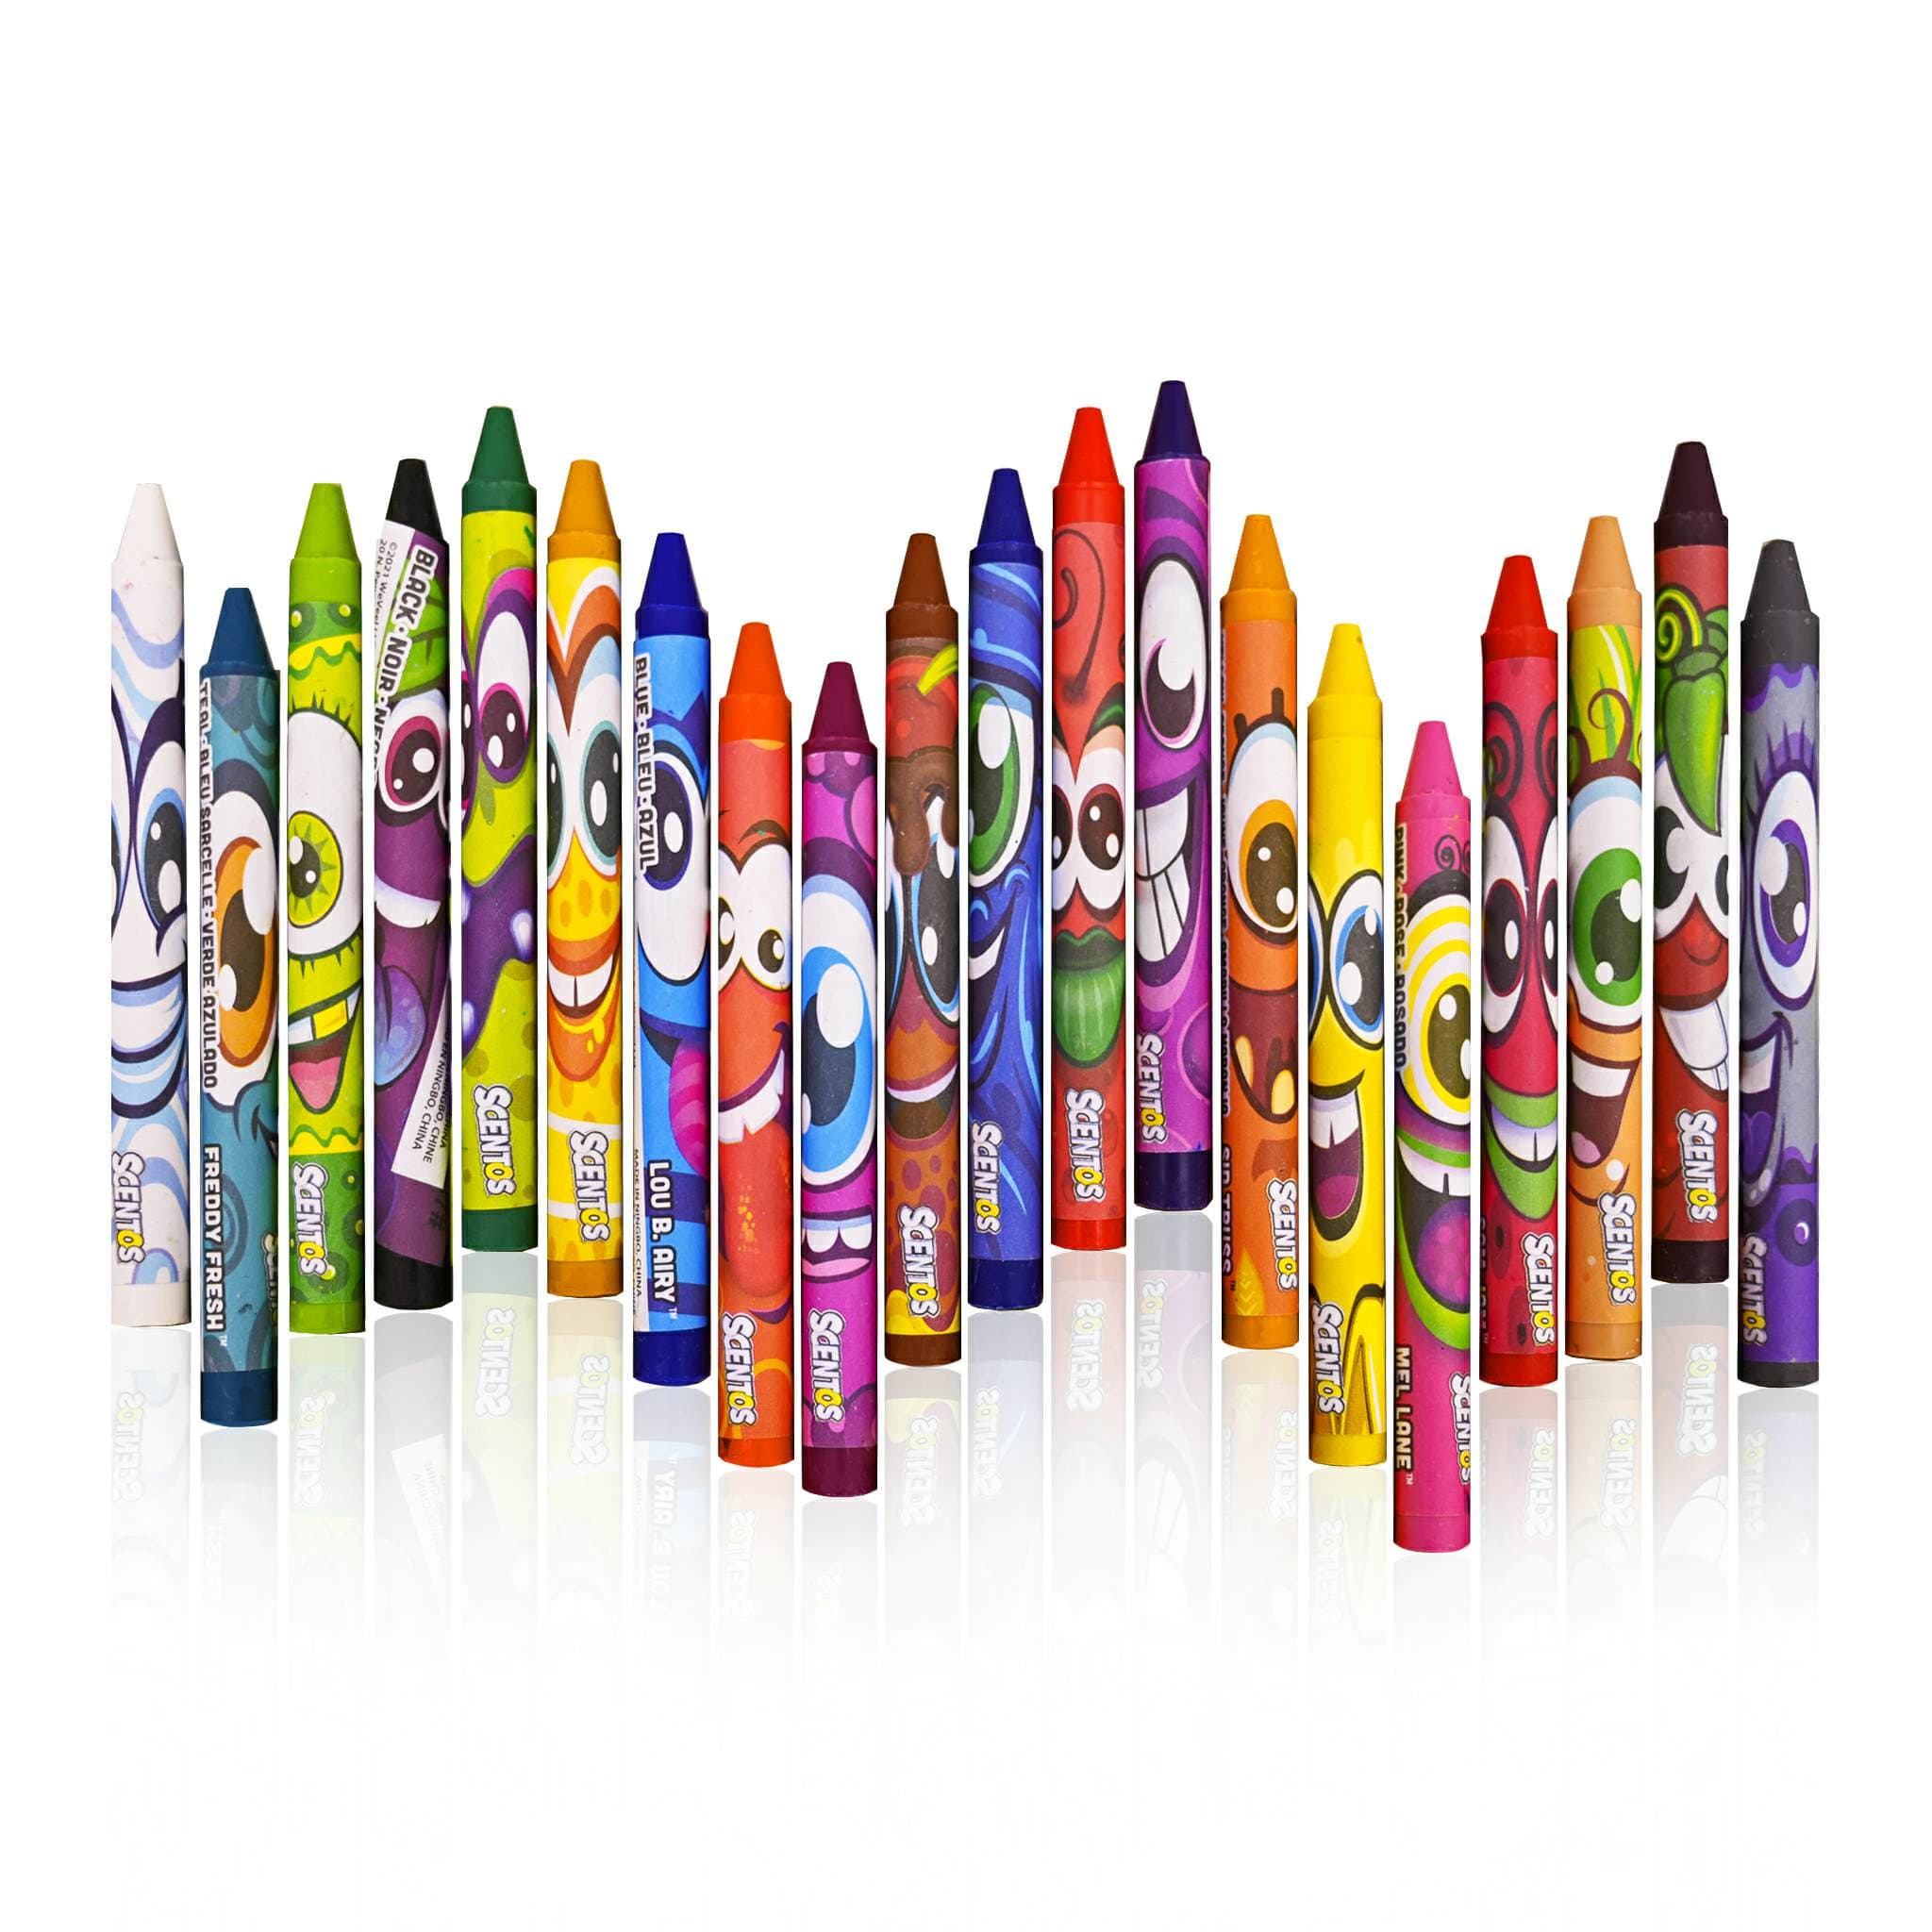 Scentos Scented Crayons - (Pack of 24) – ToyRoo - Magical World of Toys!